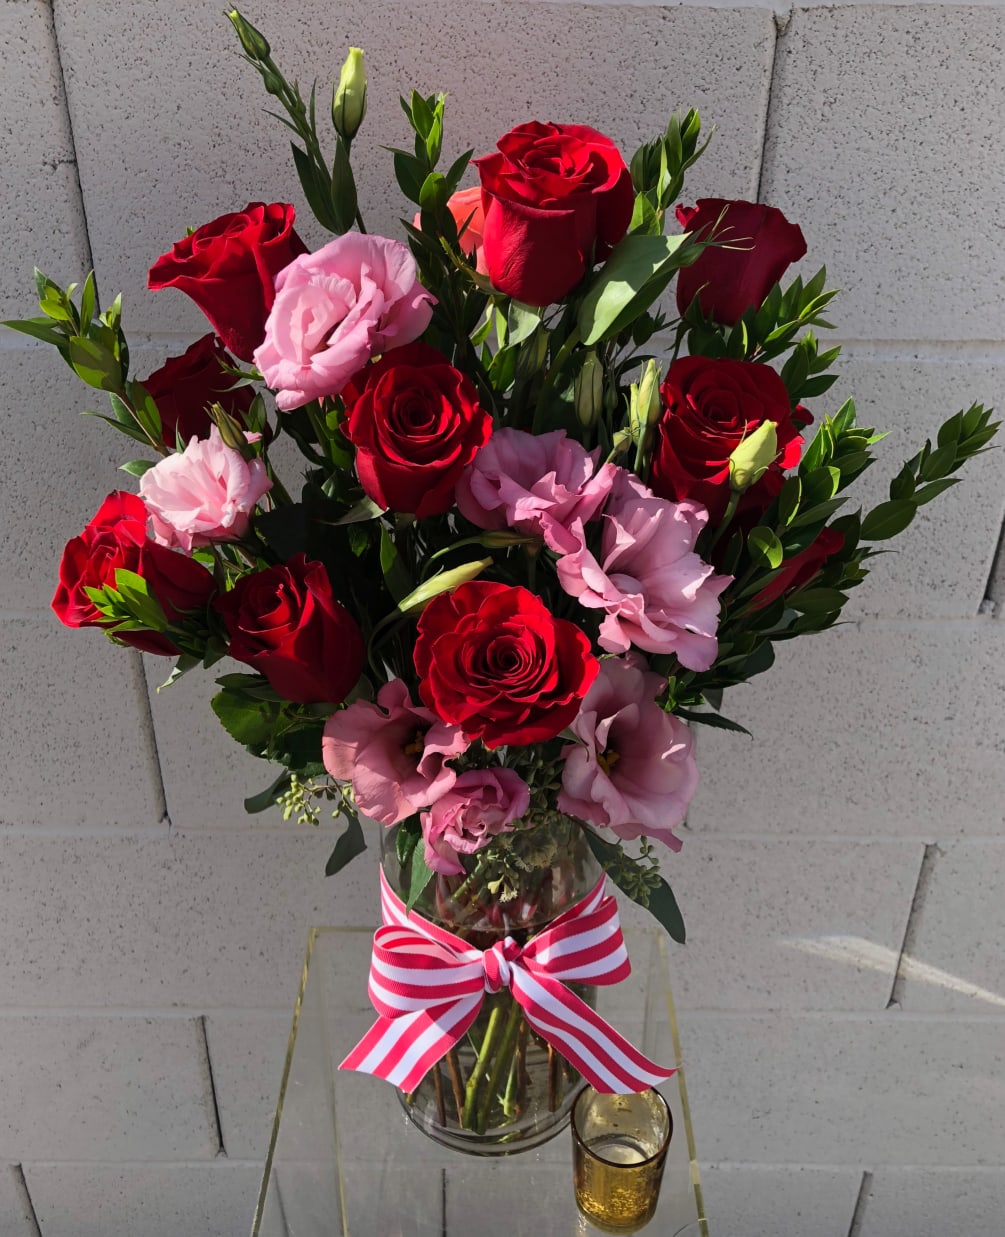 This red and pink arrangement is sure to be the sweetest treat!